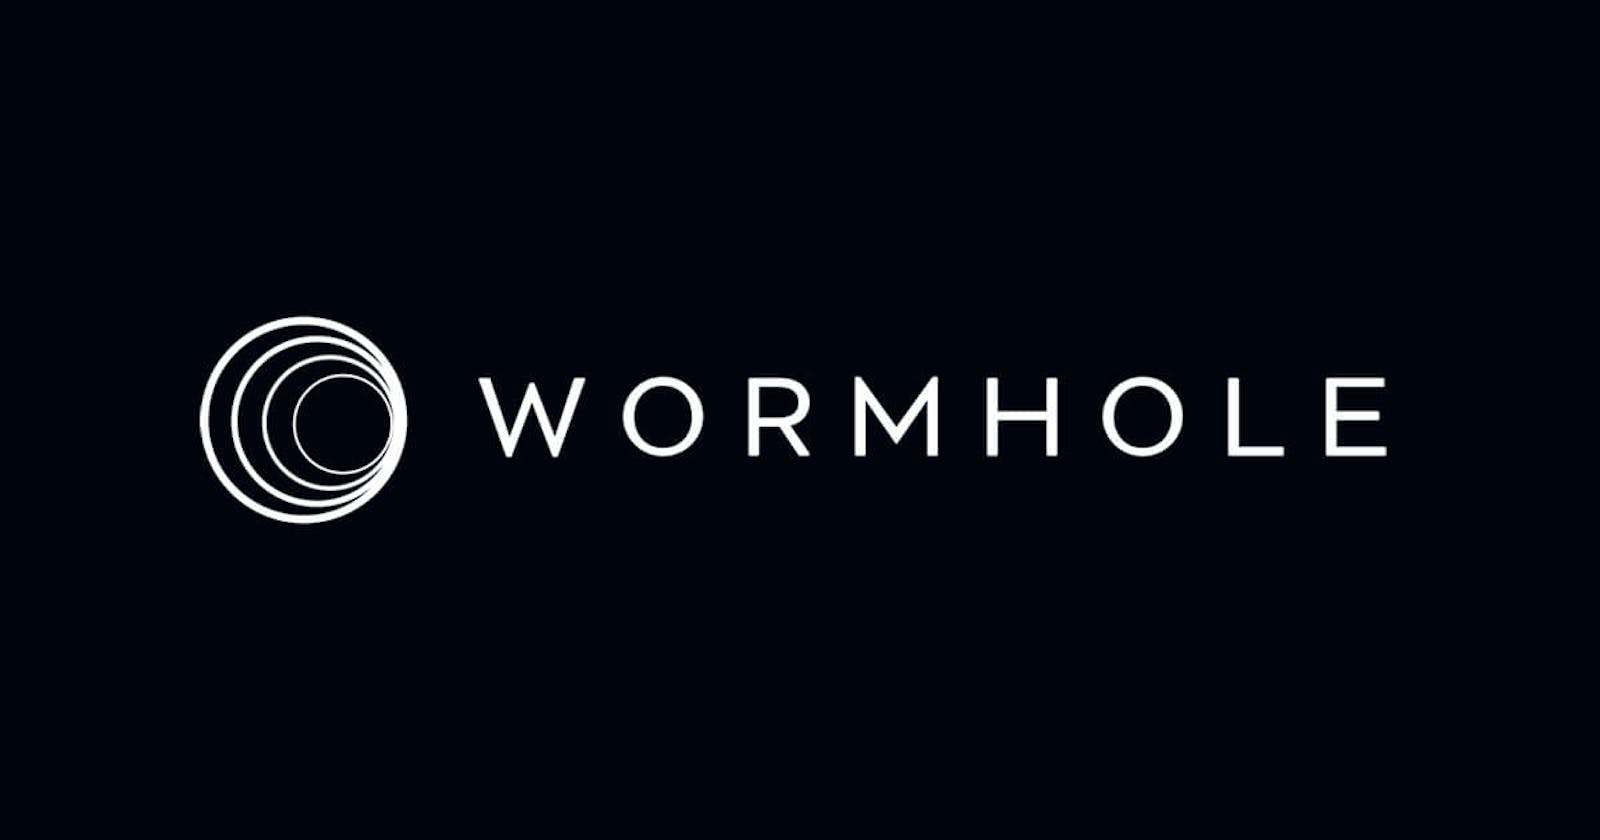 Deep Diving Into Wormhole!